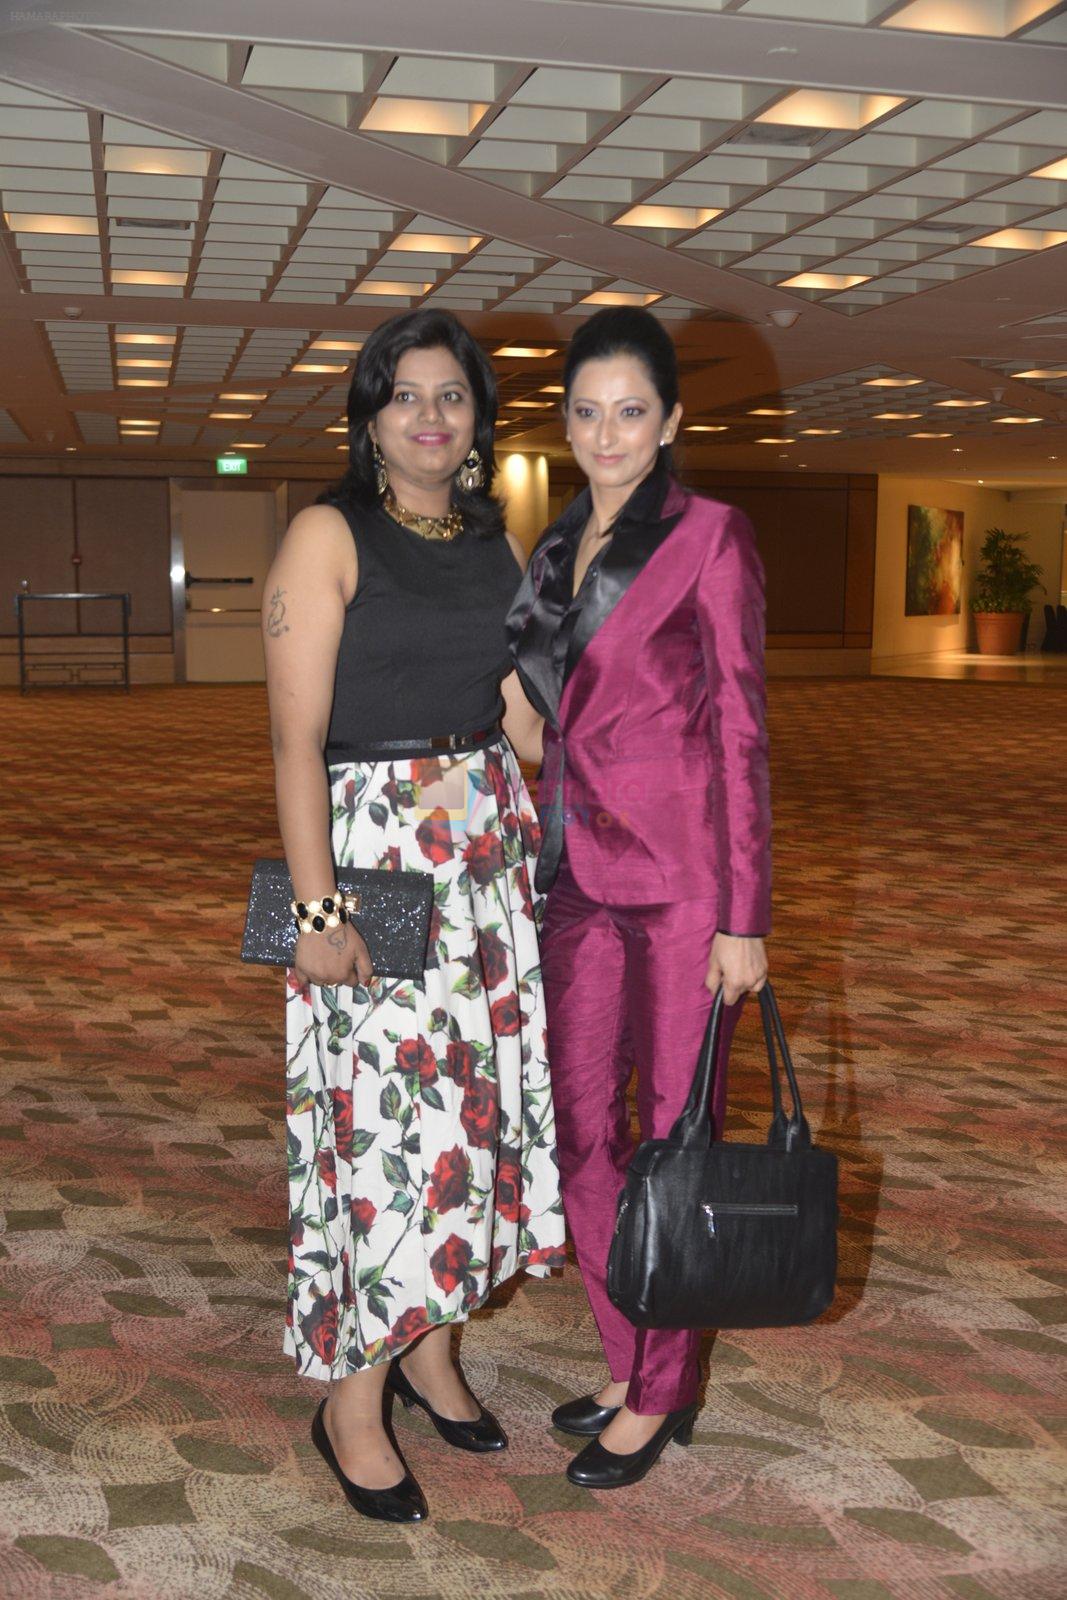 at SIIMA's South Indian Business Achievers awards in Singapore on 29th June 2016